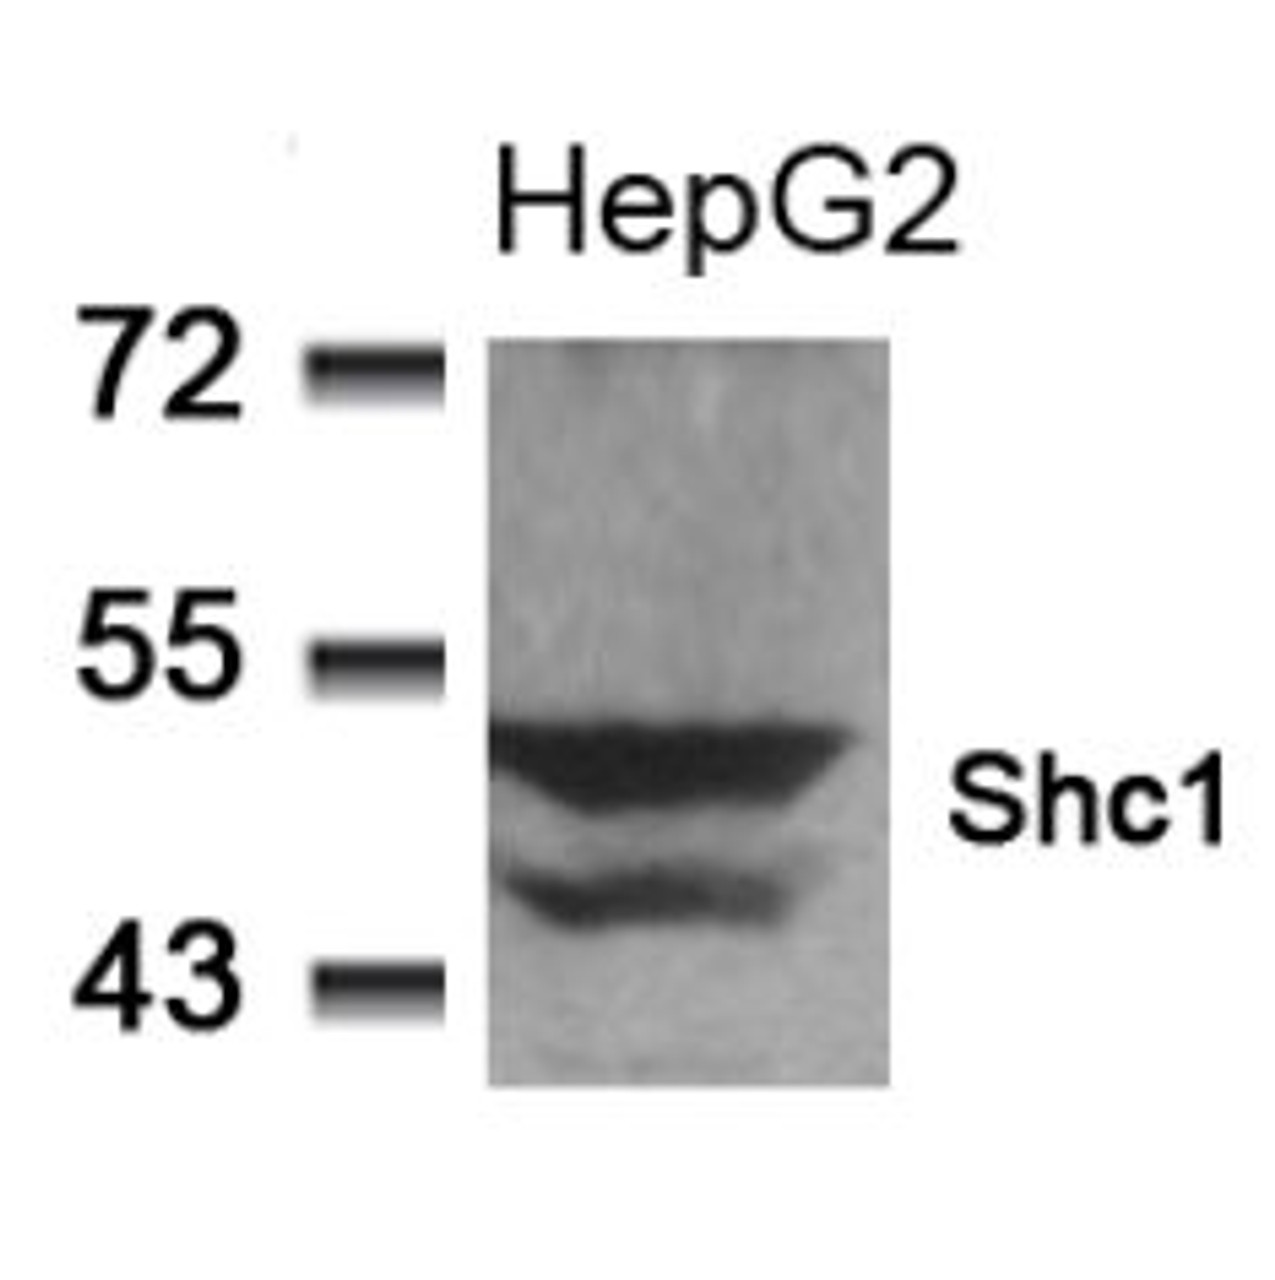 Western blot analysis of lysed extracts from HepG2 cells using Shc1 (Ab-349) .